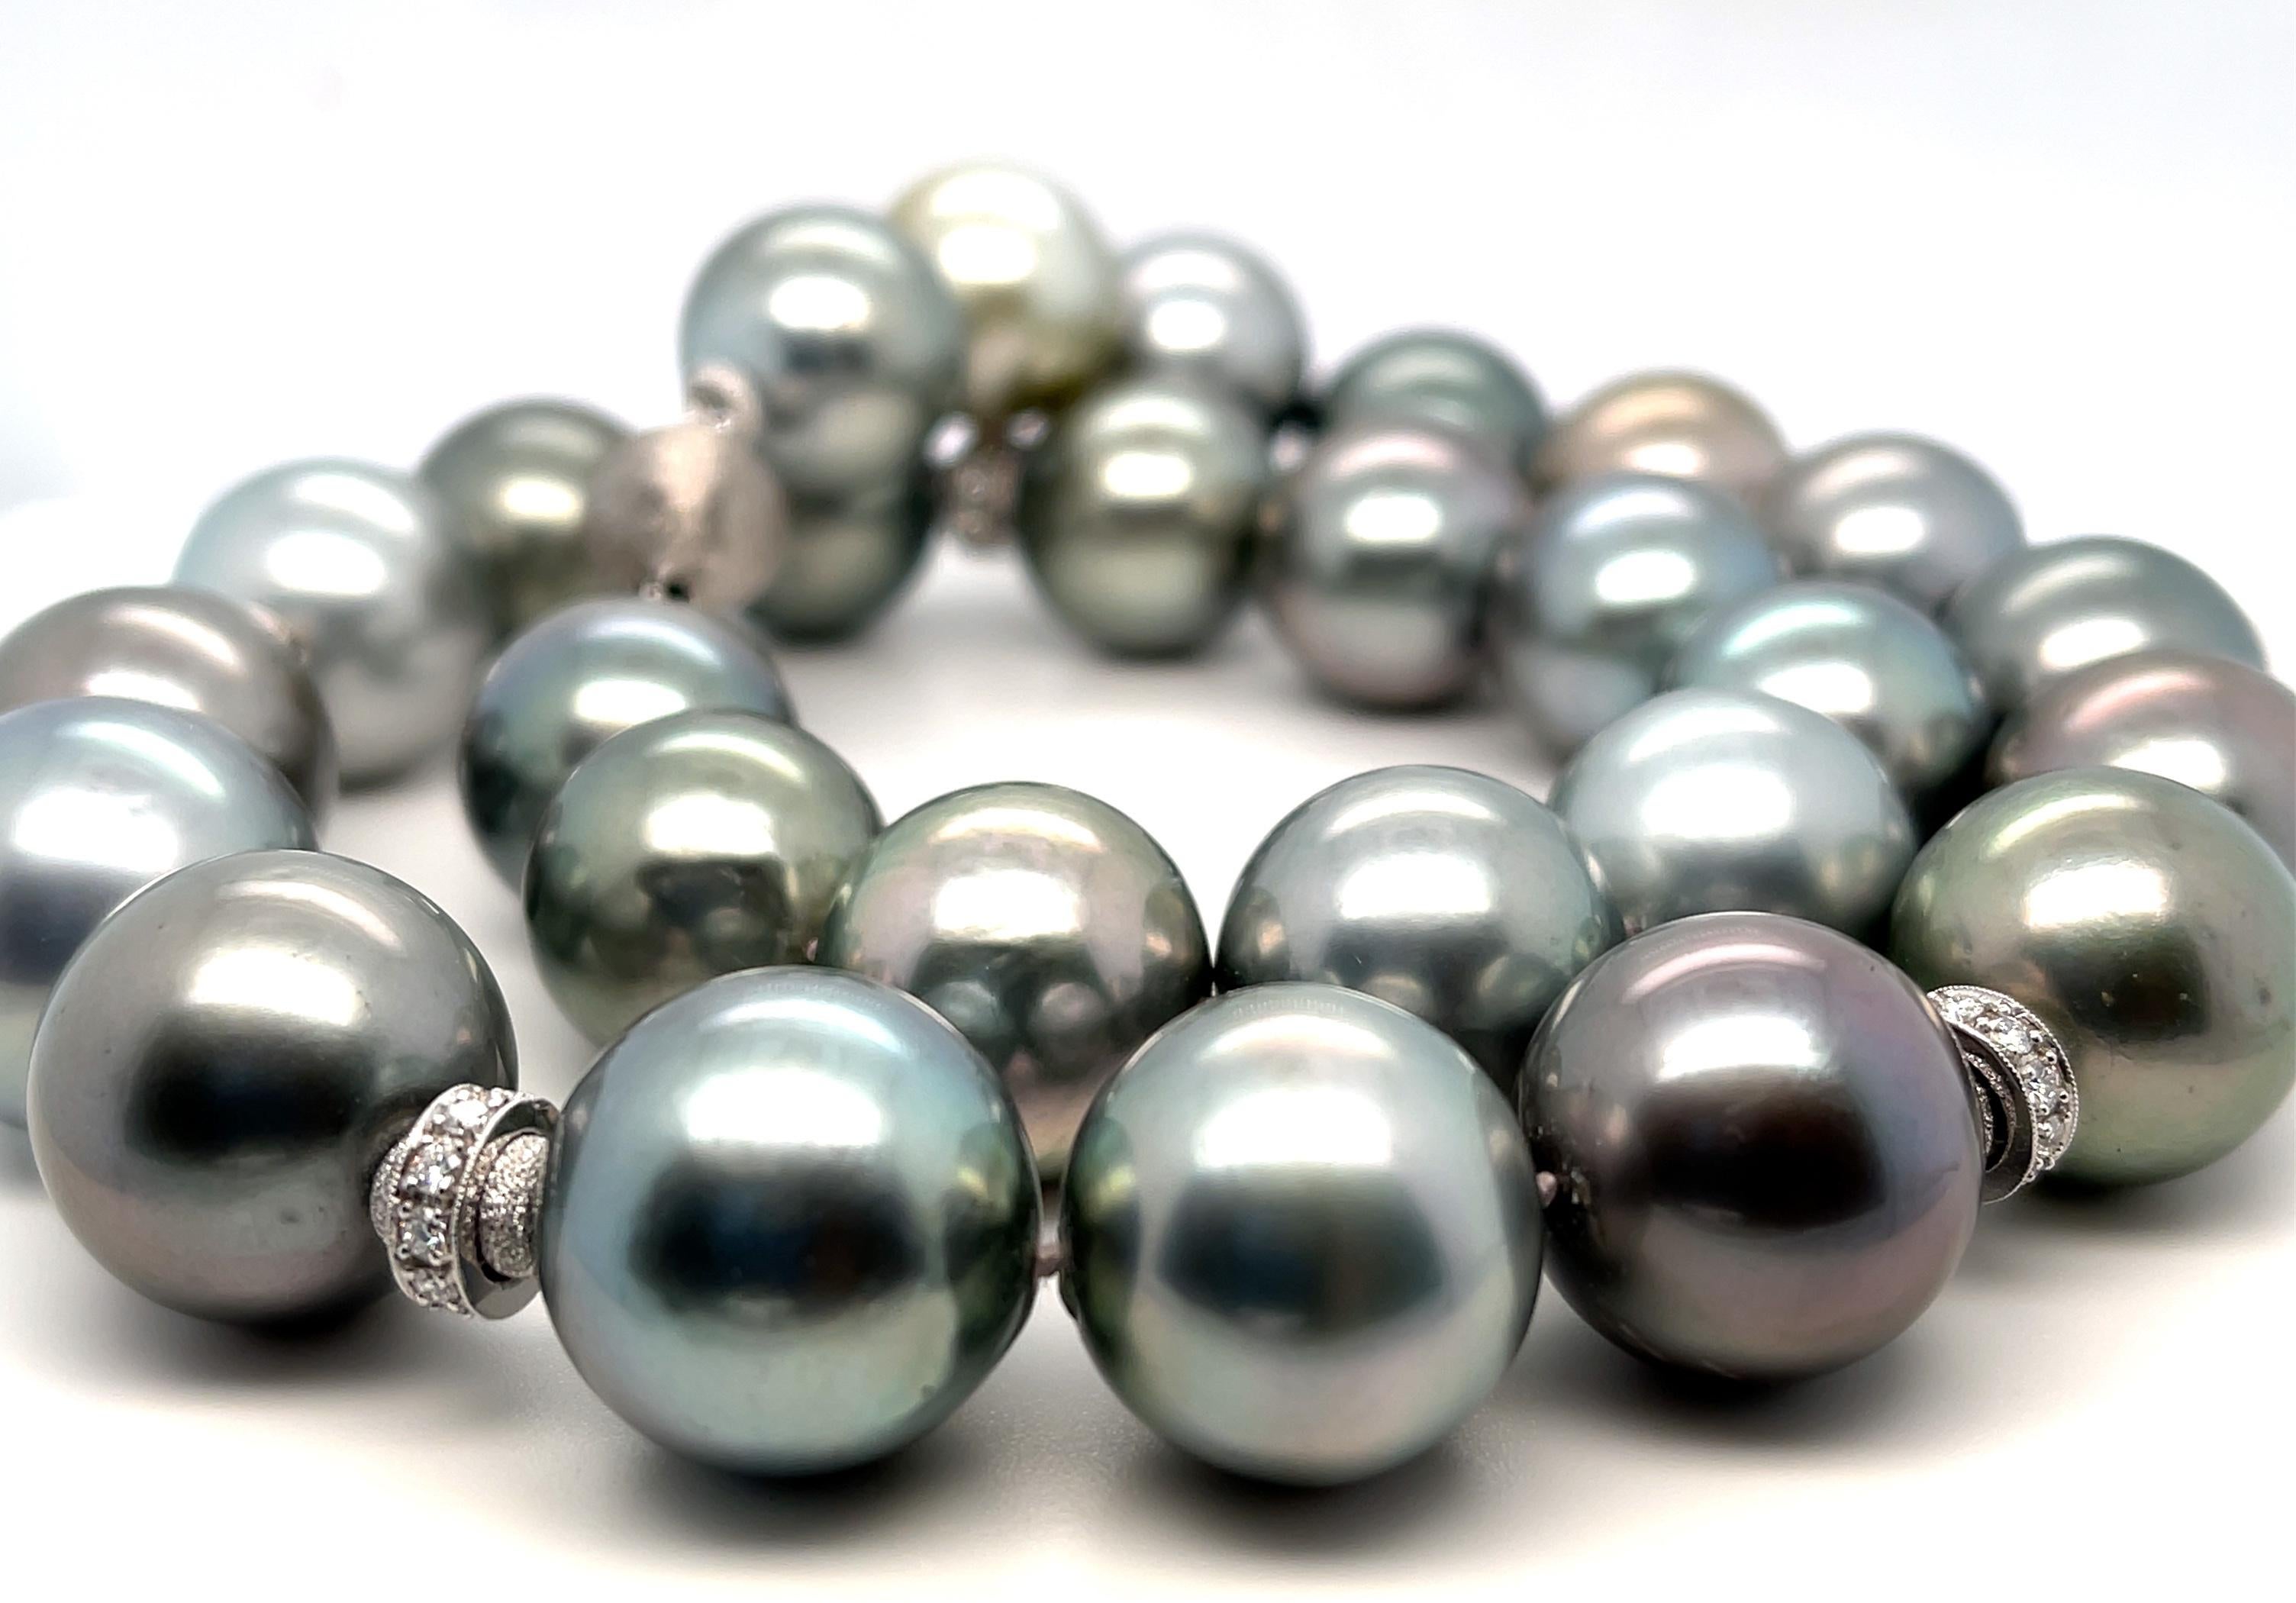 This stunning strand of silver-gray South Seas pearls features 27 impressive round pearls graduating in size from 15.36mm to a spectacular 17.45mm pearl in the center the necklace! The pearls are of excellent quality, with gorgeous pearlescence and